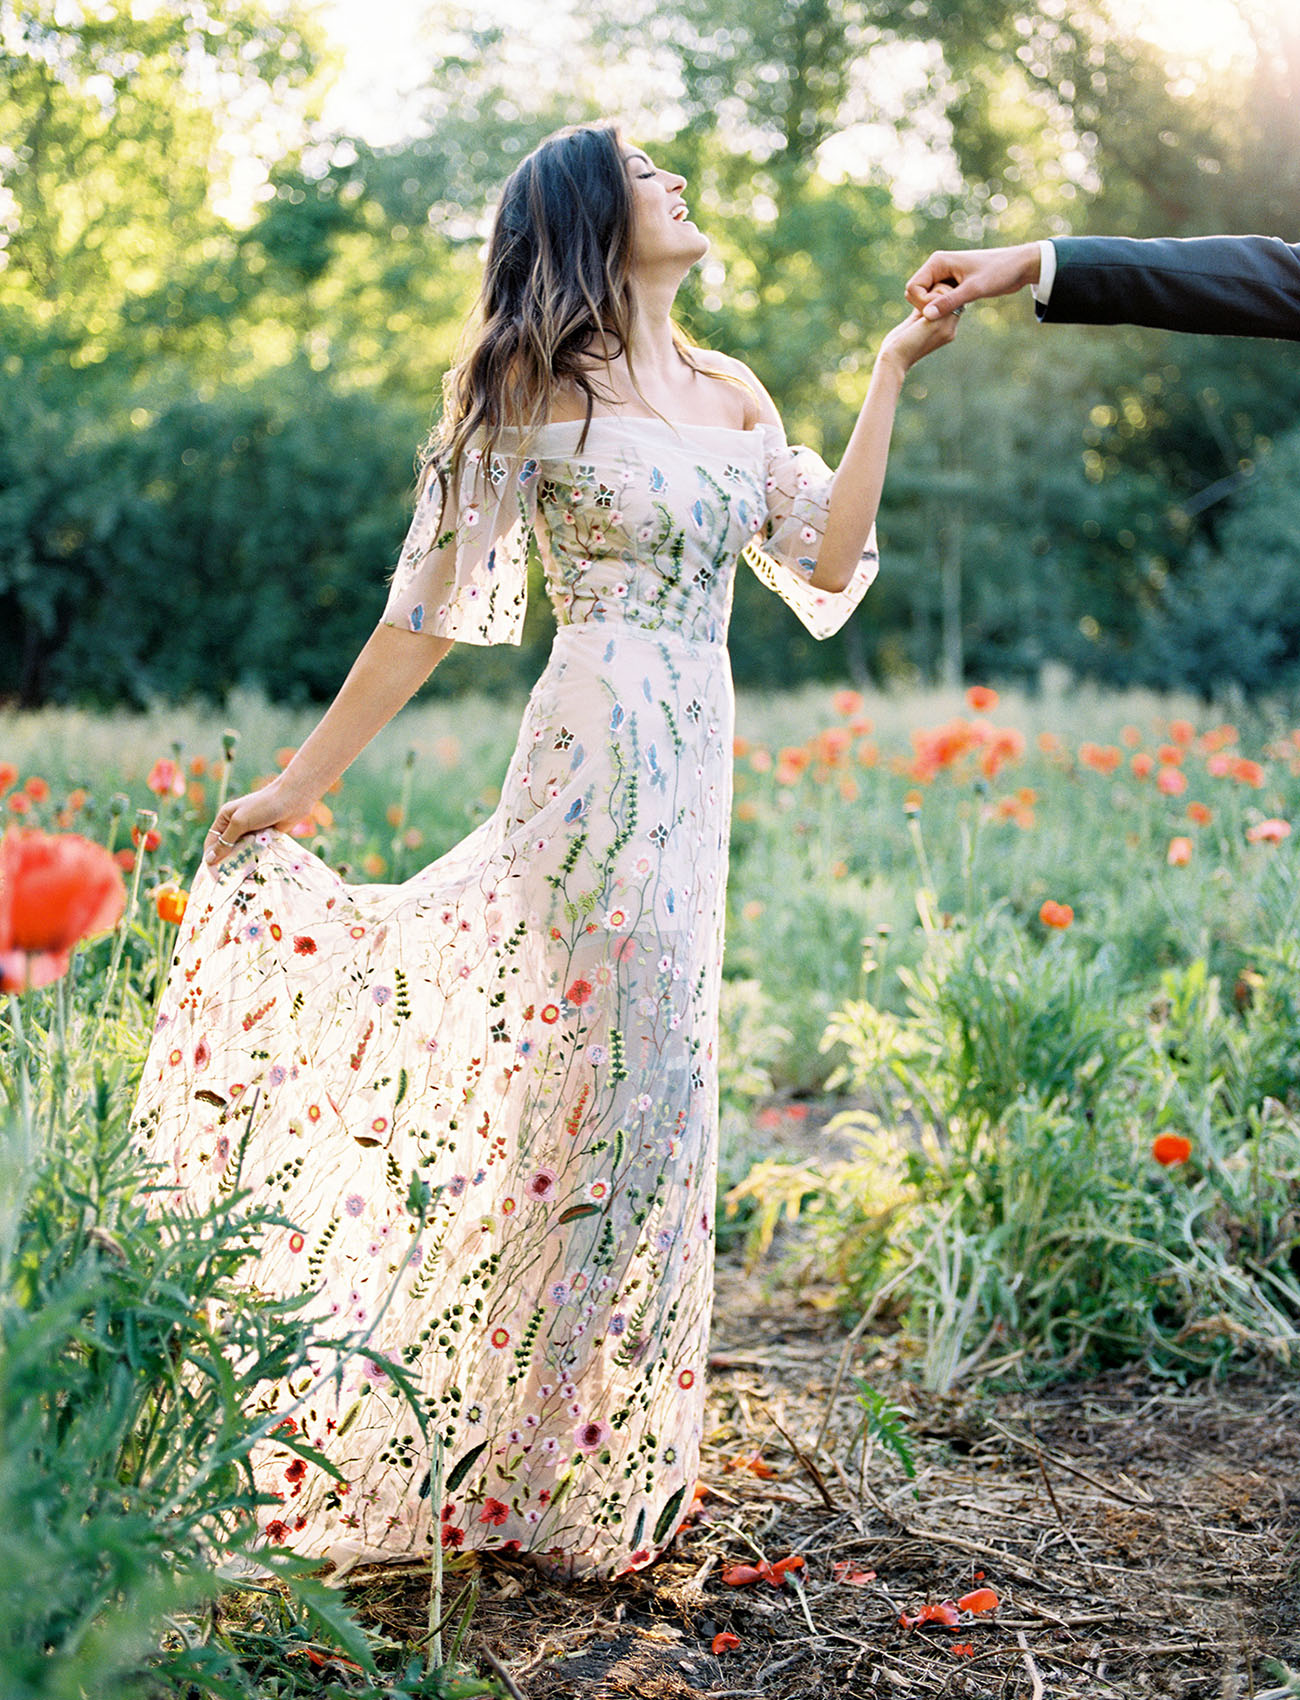 Embroidered wedding dress with wildflower pattern